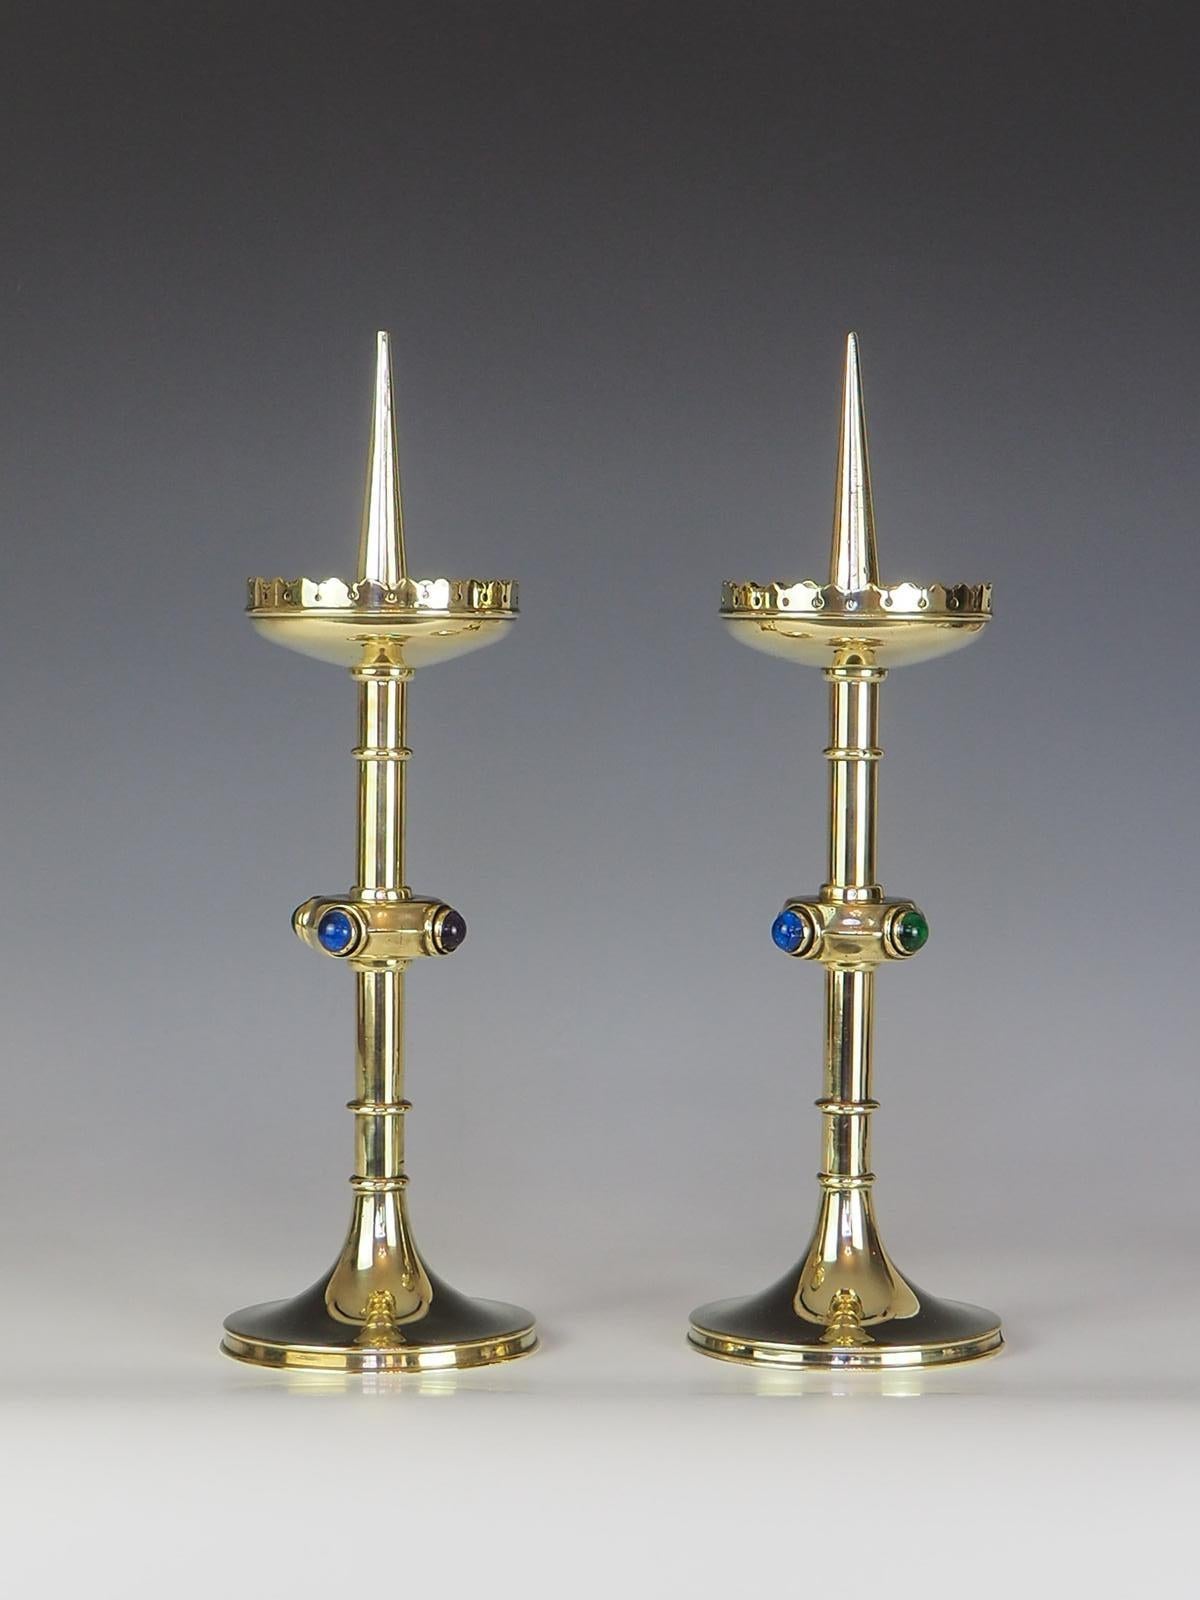 Pair of Arts and Crafts Candle Holders with Semi Precious Cabochon Stones

These exquisite Arts and Crafts Candle Holders are a perfect addition to any home. Crafted with utmost precision and attention to detail, these candle holders showcase a